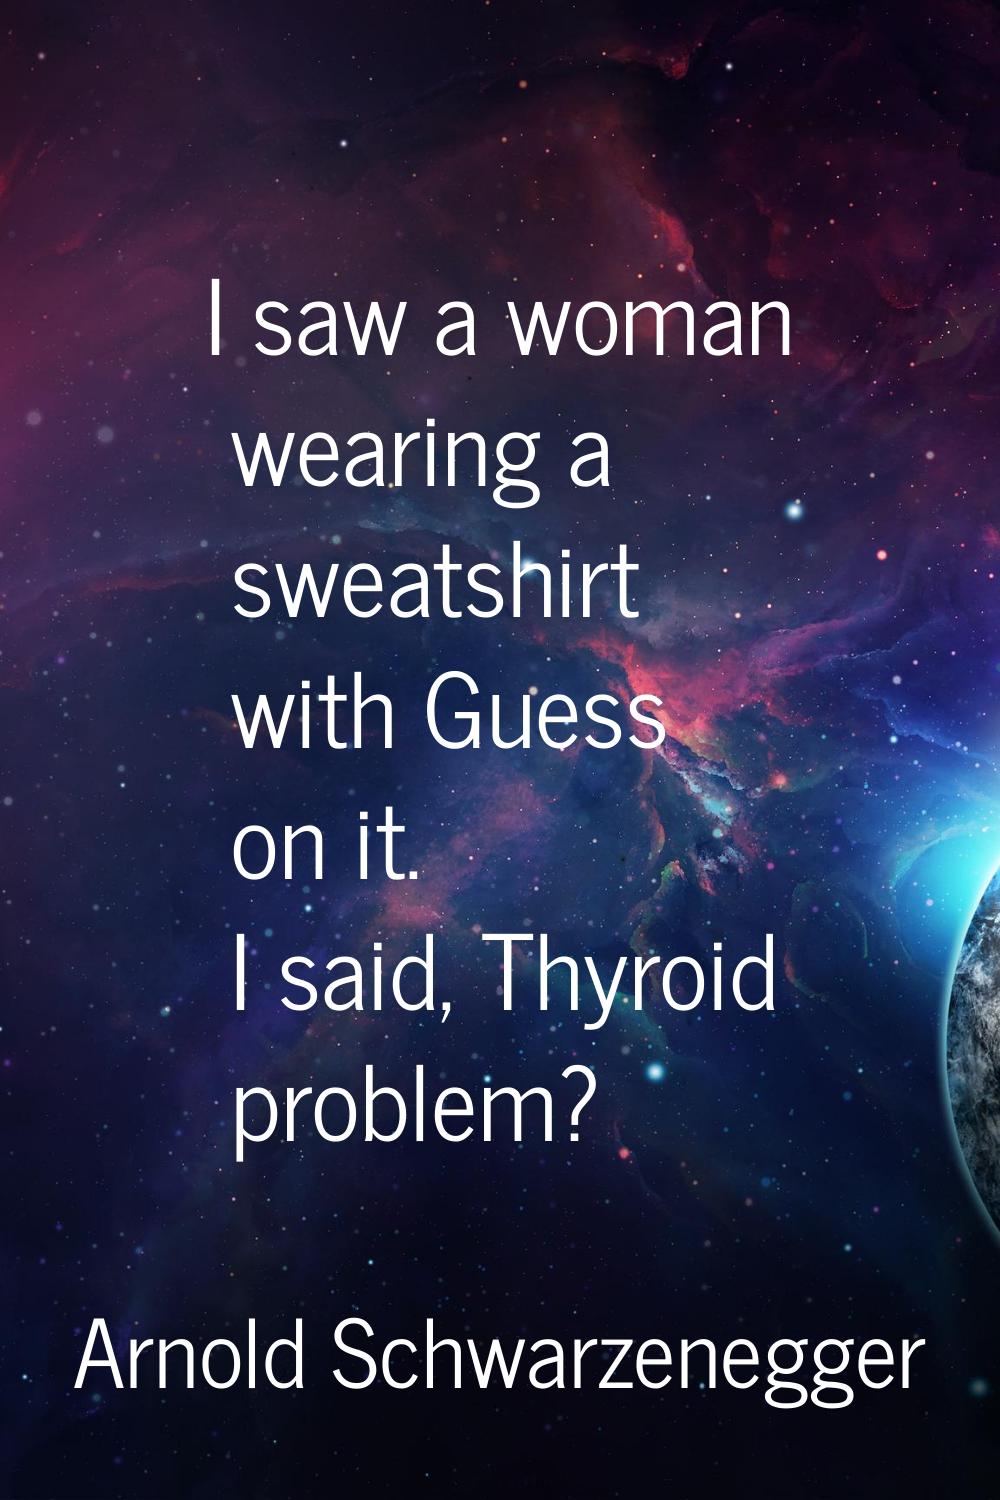 I saw a woman wearing a sweatshirt with Guess on it. I said, Thyroid problem?